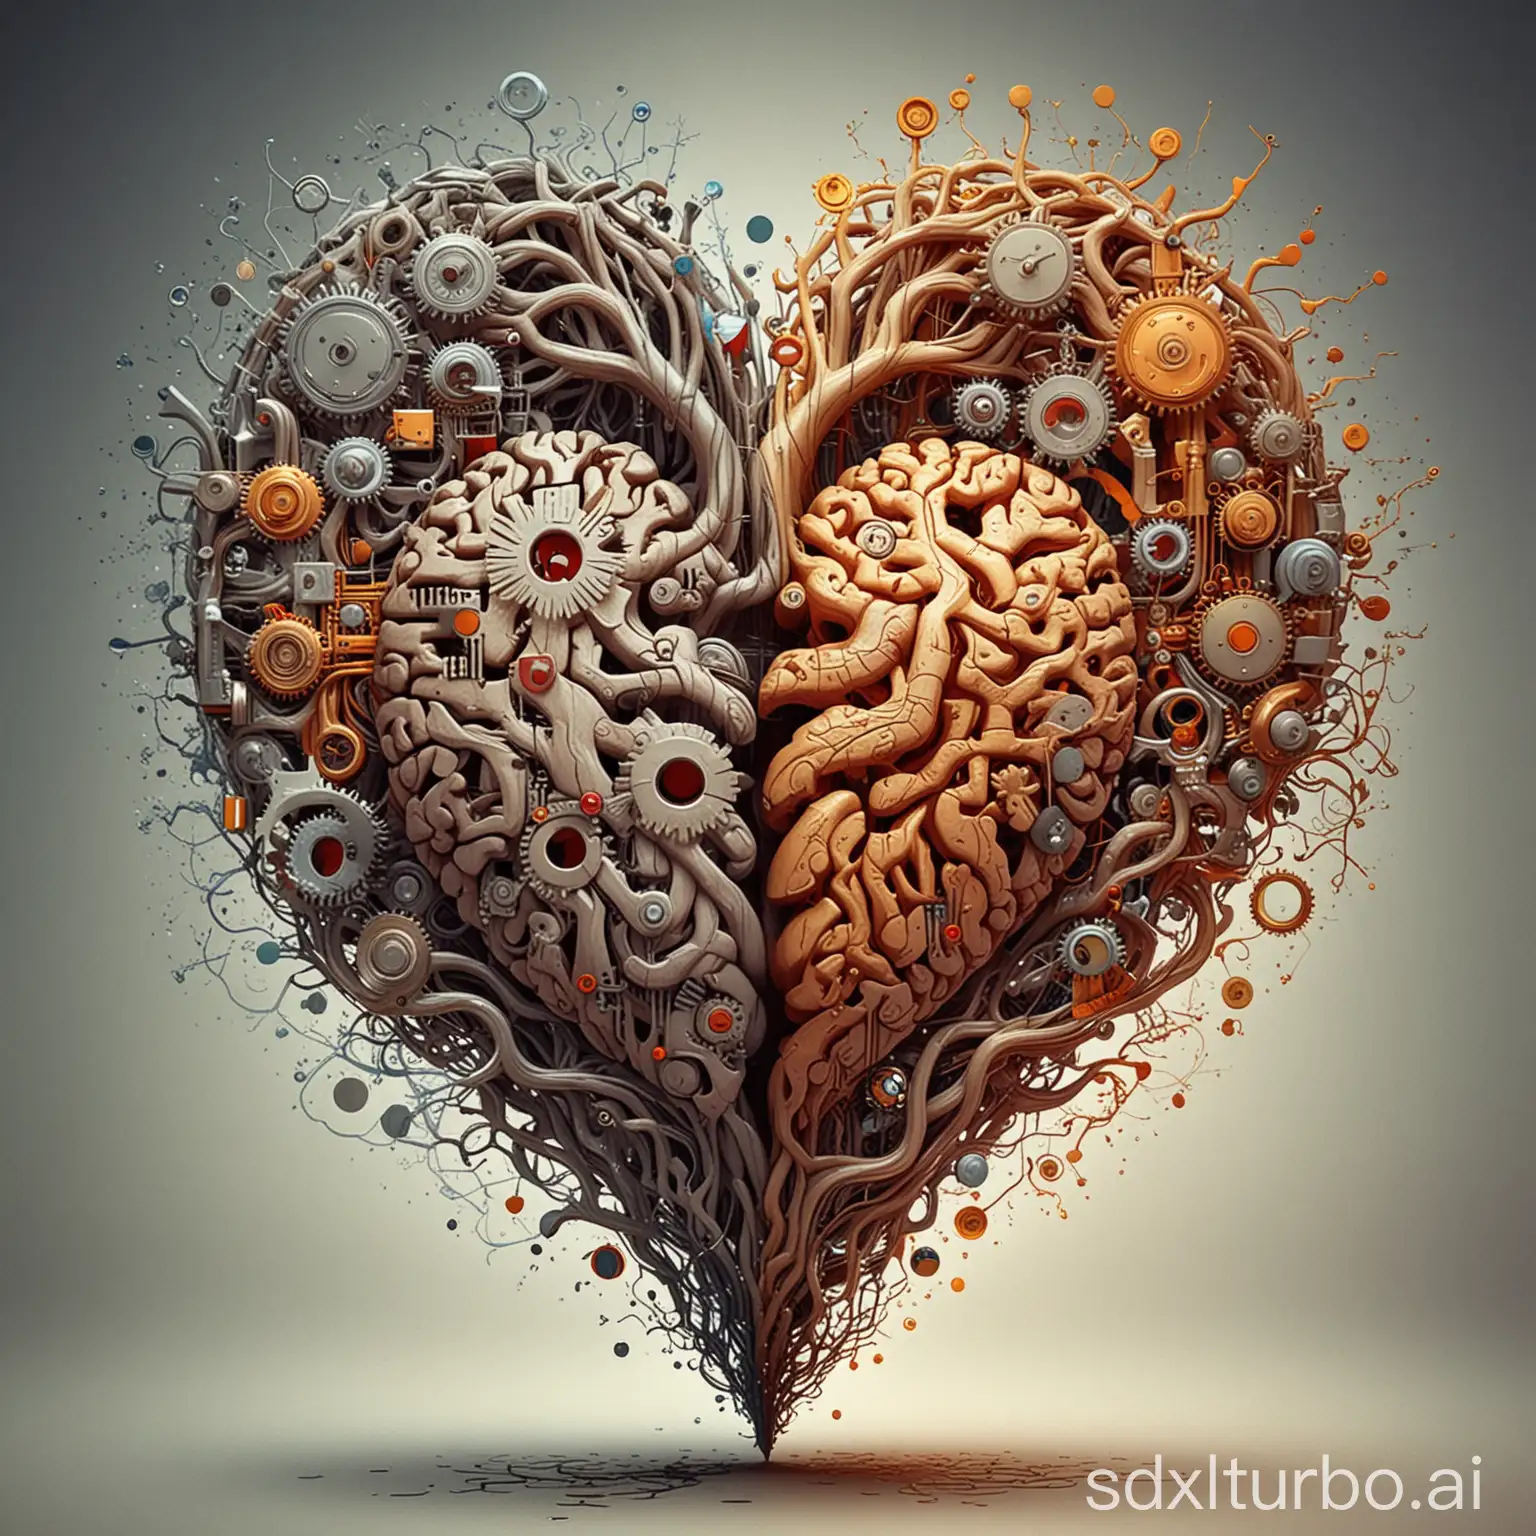 Create a visual representation contrasting the concepts of 'Mind and Brain' with 'Heart and Soul'. On one side, depict the 'Mind and Brain' with imagery symbolizing logic, thought processes, and intellectual pursuits. This could include elements like gears, neurons firing, or a person deep in thought. On the other side, represent 'Heart and Soul' with symbols of emotions, empathy, and spirituality. Use warm colors, flowing lines, and perhaps incorporate nature elements like trees or flowing water to evoke a sense of deep feeling and connection.